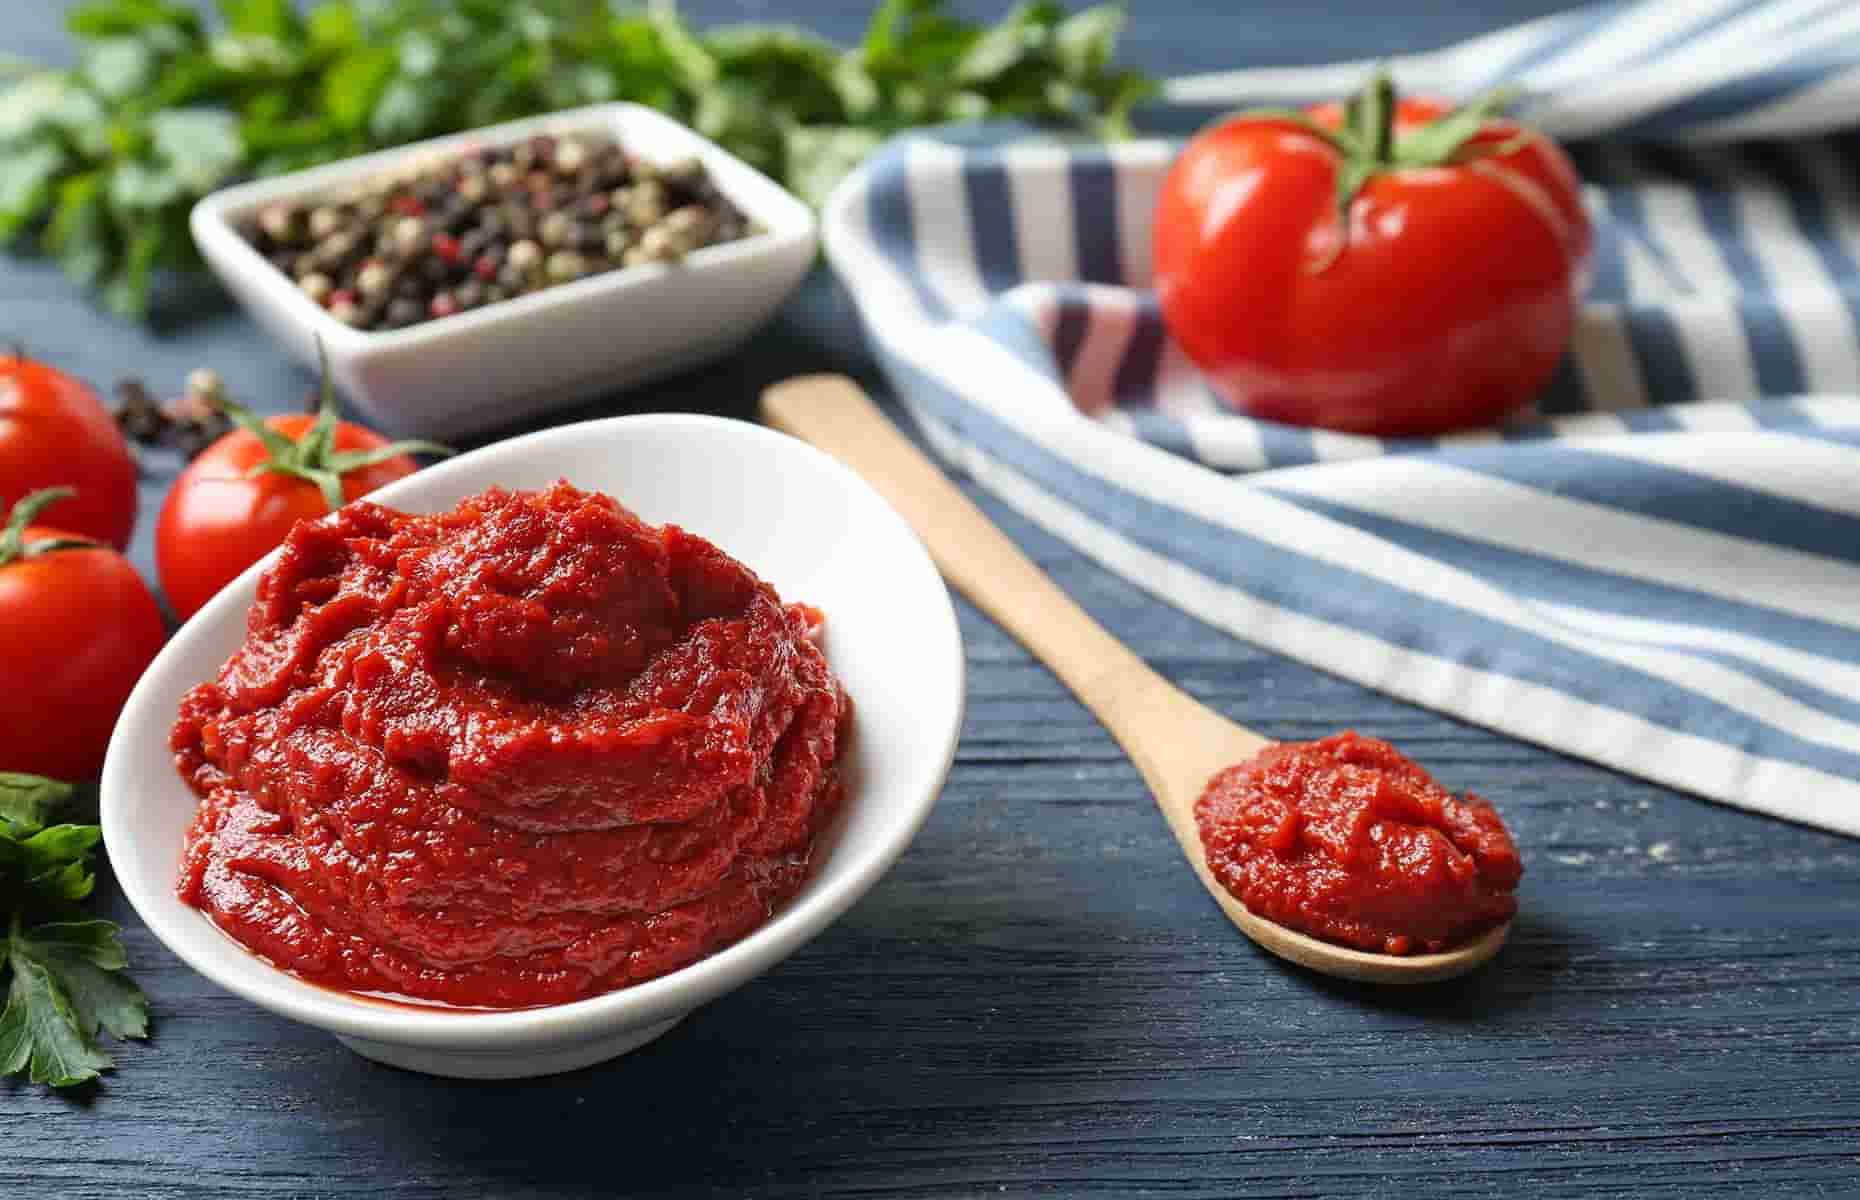 How to store tomato paste without a fridge